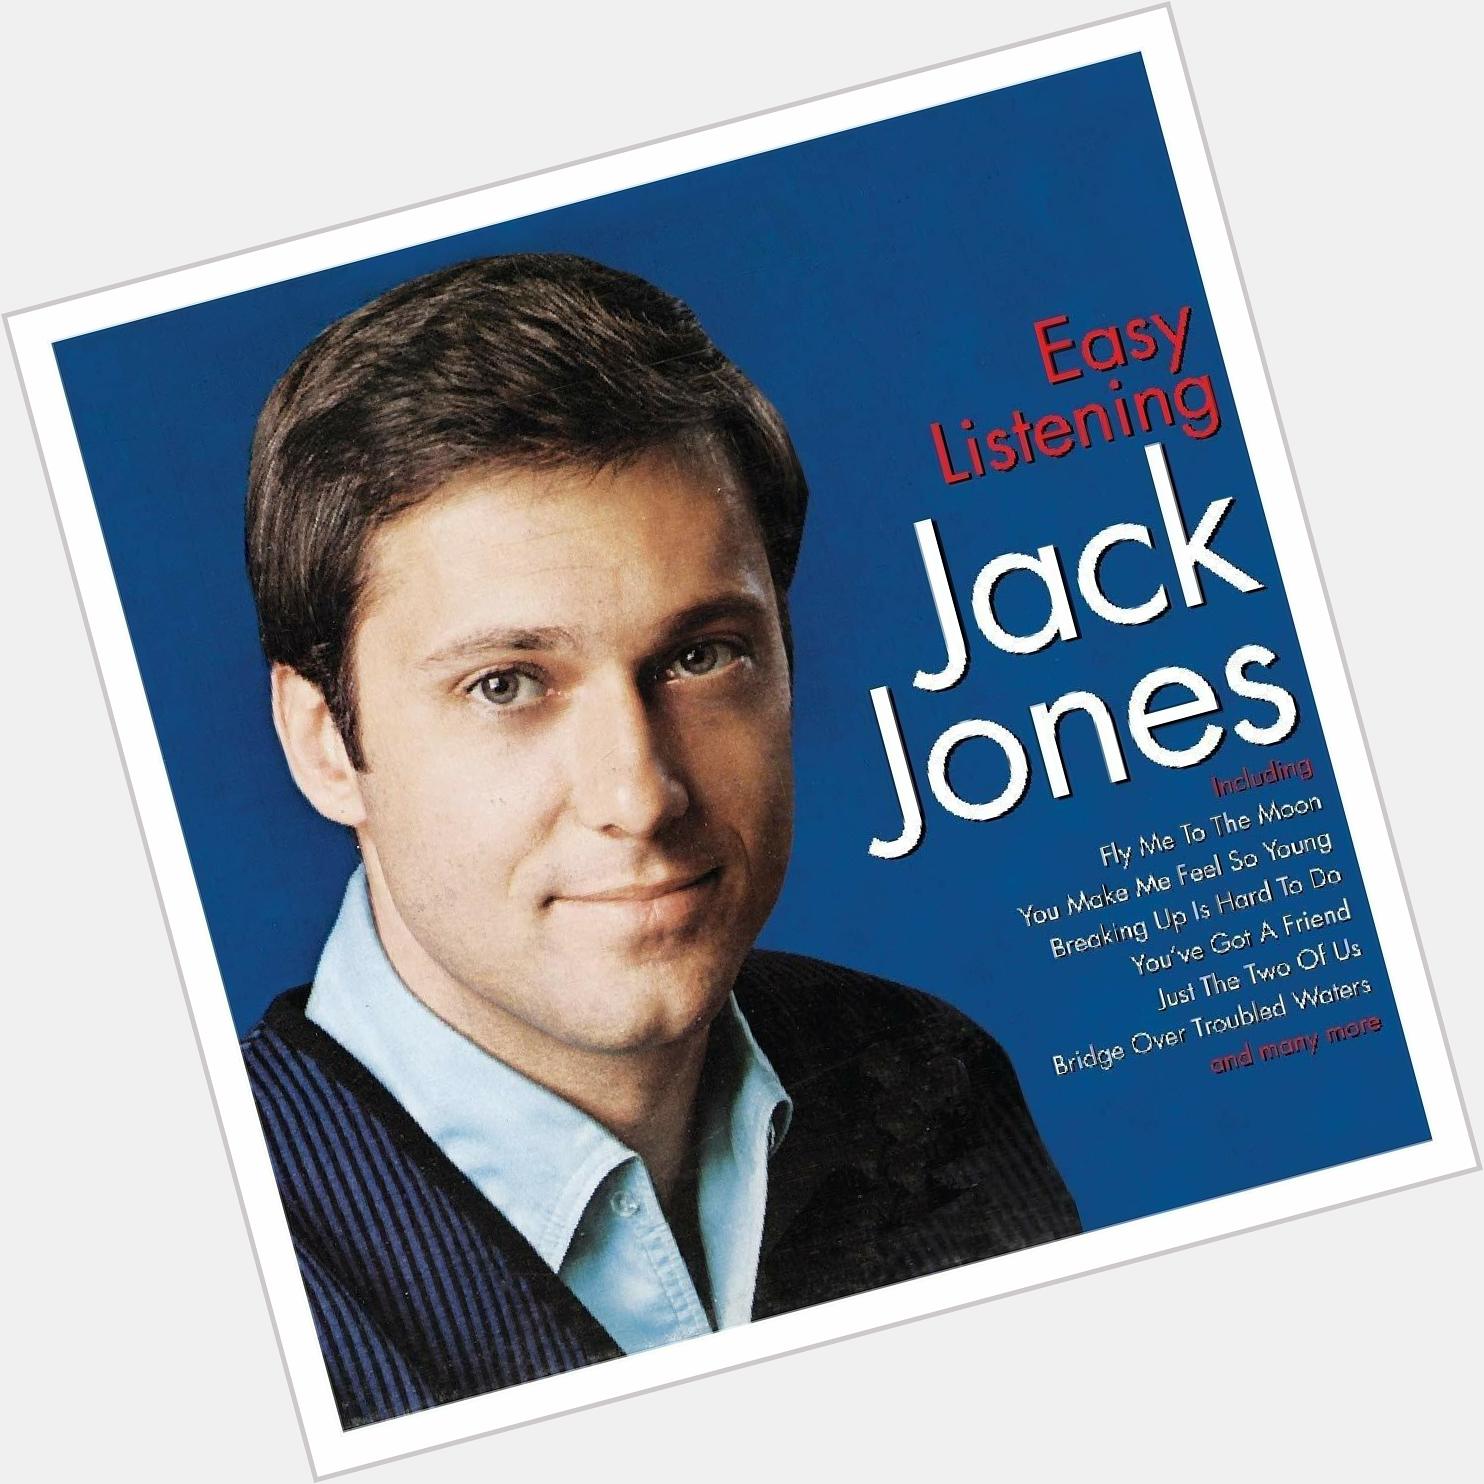 Happy Birthday American singer and actor Jack Jones, now 85 years old. Jack sang the fantastic Love Boat theme. 